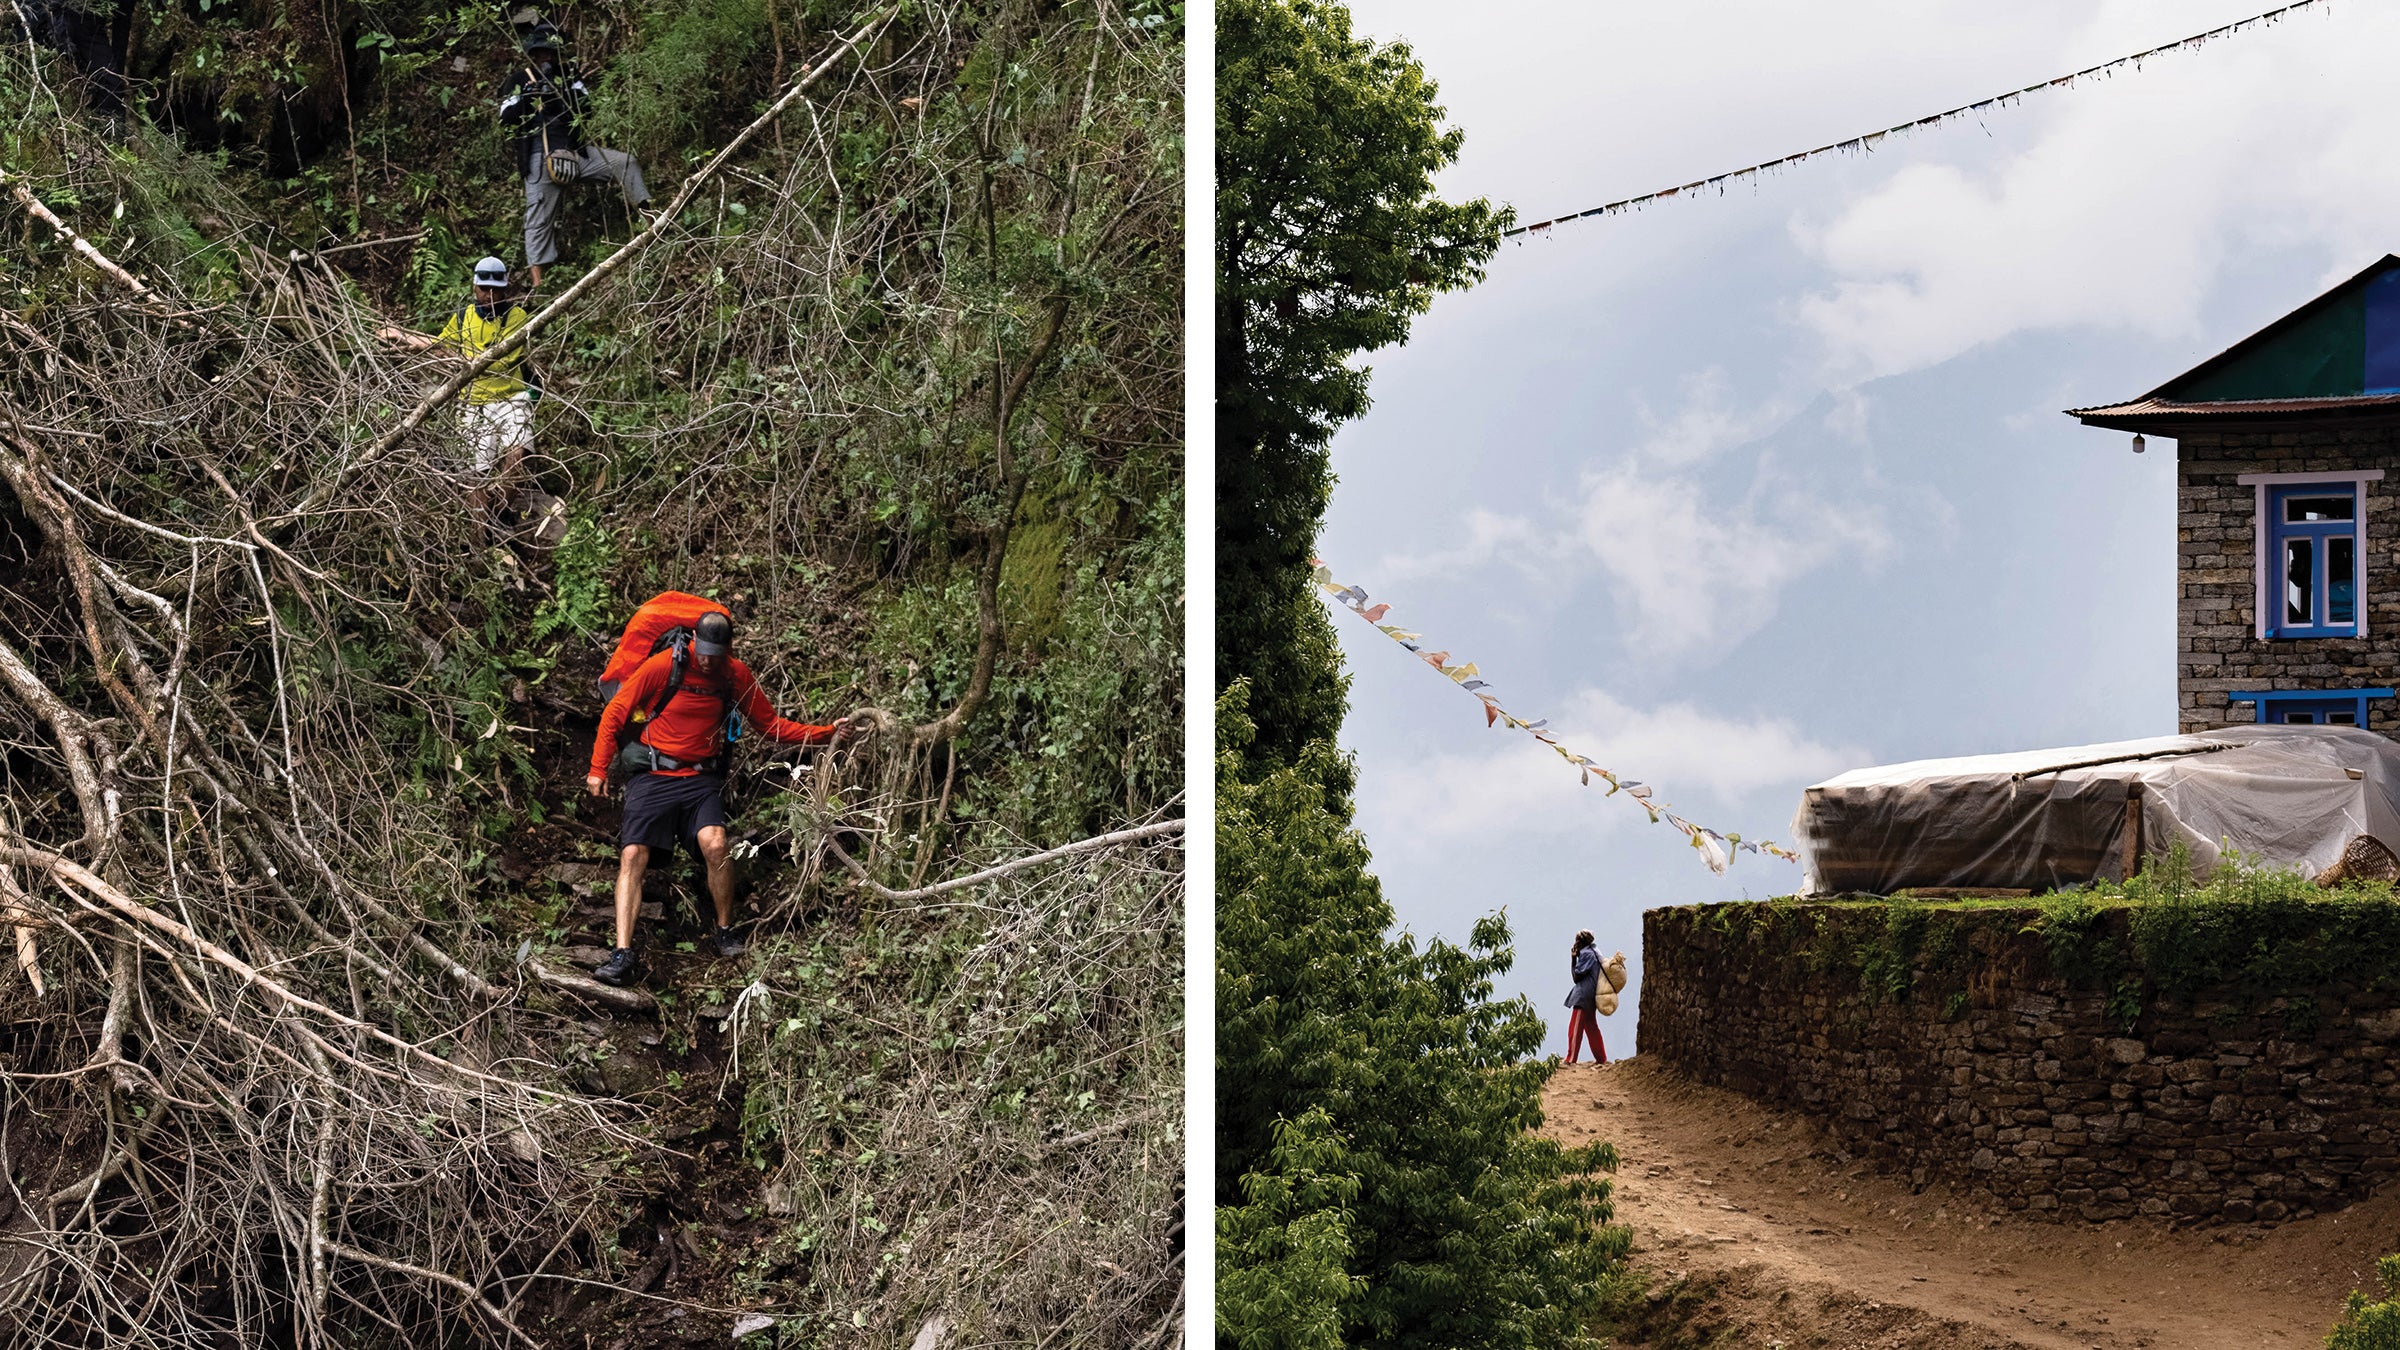 Left: the author detouring around a rockslide near the village of Puiya. Right: a local carrying supplies.